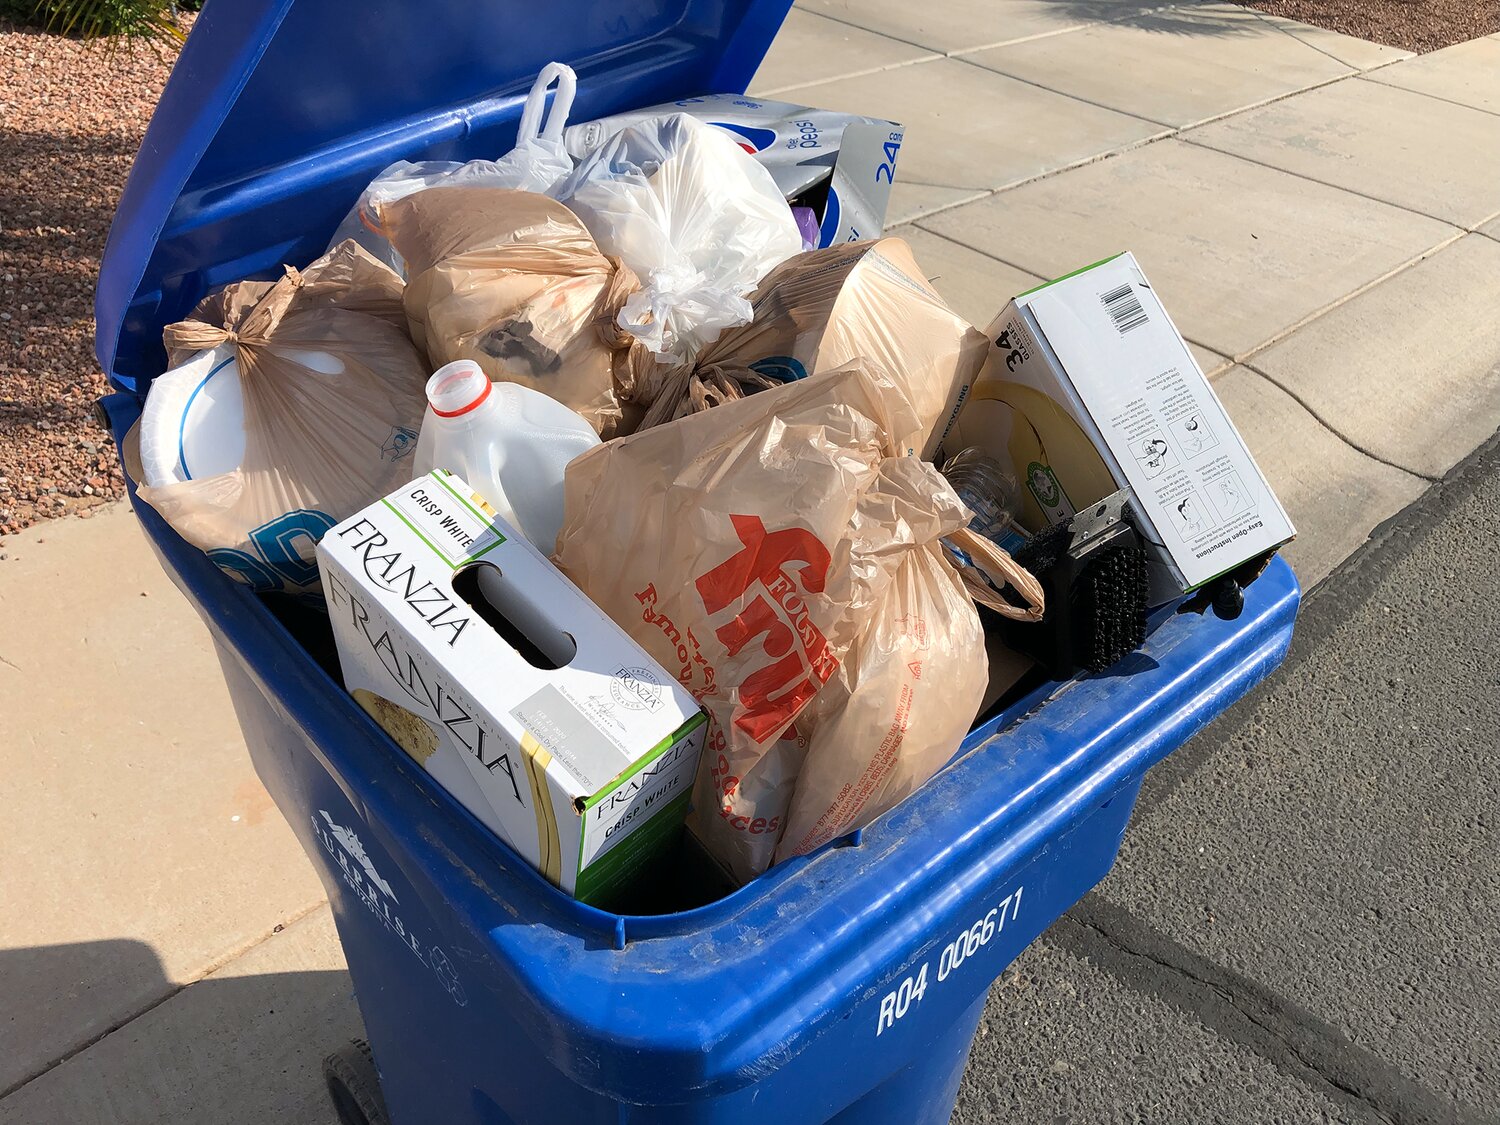 Surprise officials will be educating residents on what to put in the blue recycling bins as the city relaunches curbside recycling service sometime this year. Trash in plastic bags and used food boxes are considered contaminants in a recycling pile.